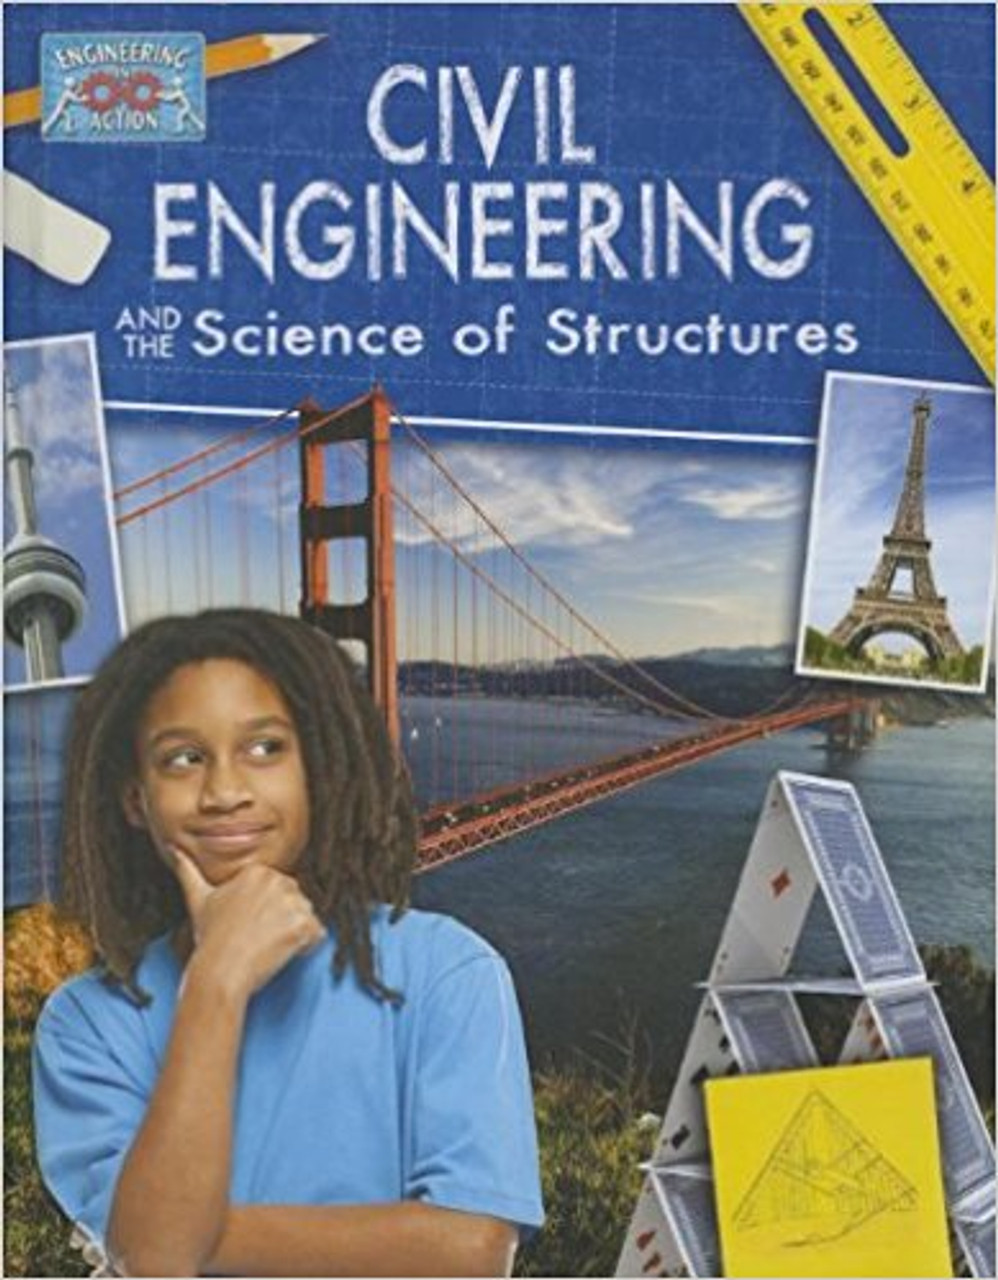 Civil Engineering and the Science of Structures (Paperback) by Andrew Solway